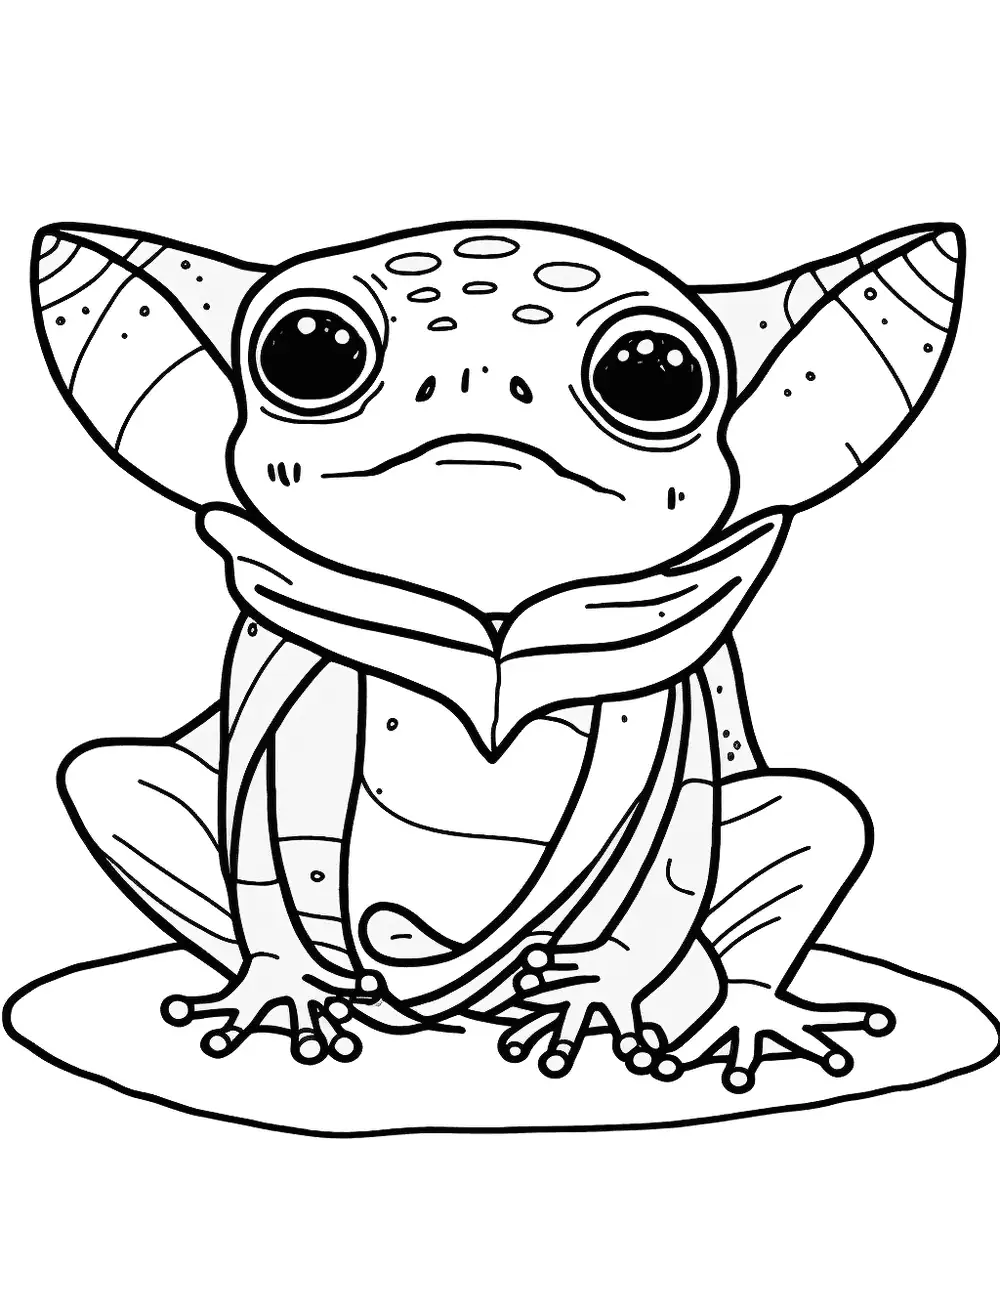 Baby Yoda Frog Coloring Page - A frog dressed as Baby Yoda, with green skin and big ears.